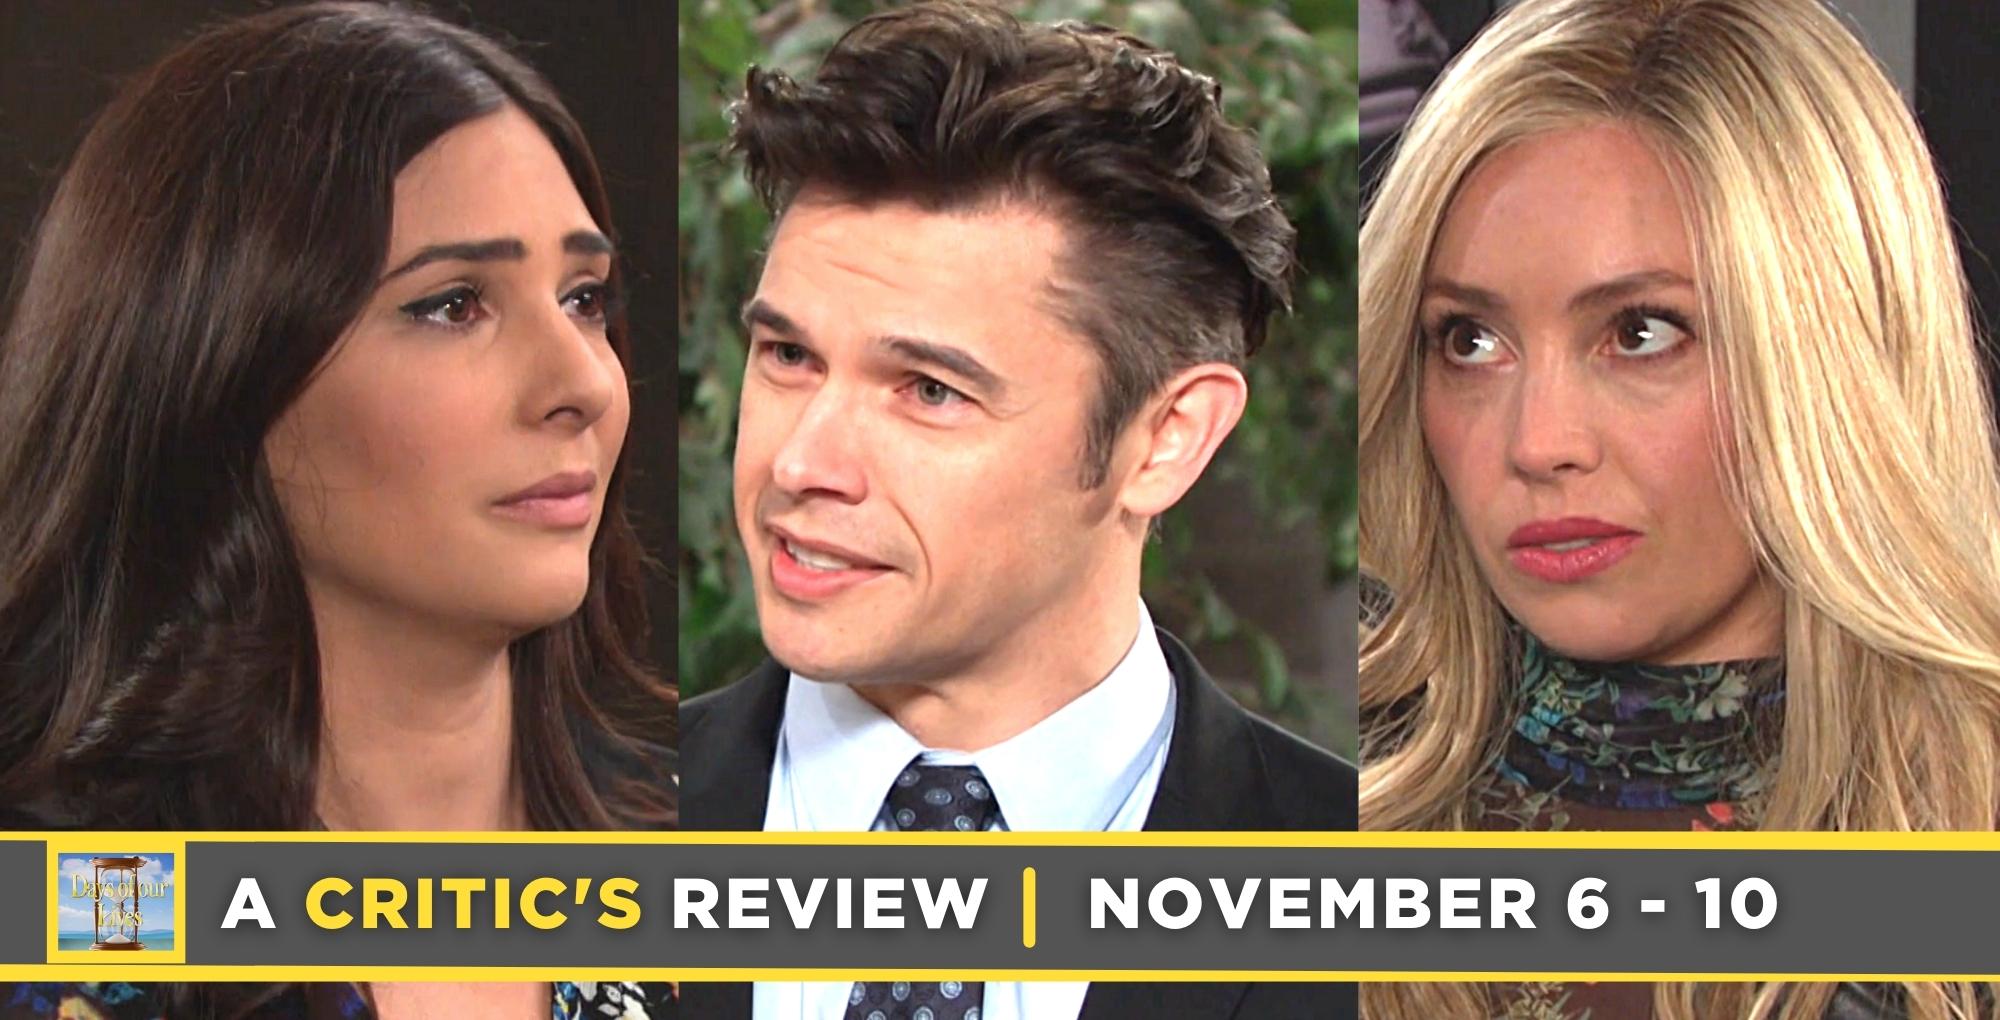 days of our lives critic's review for november 6 – november 10, 2023, three images, gabi, xander, and theresa.